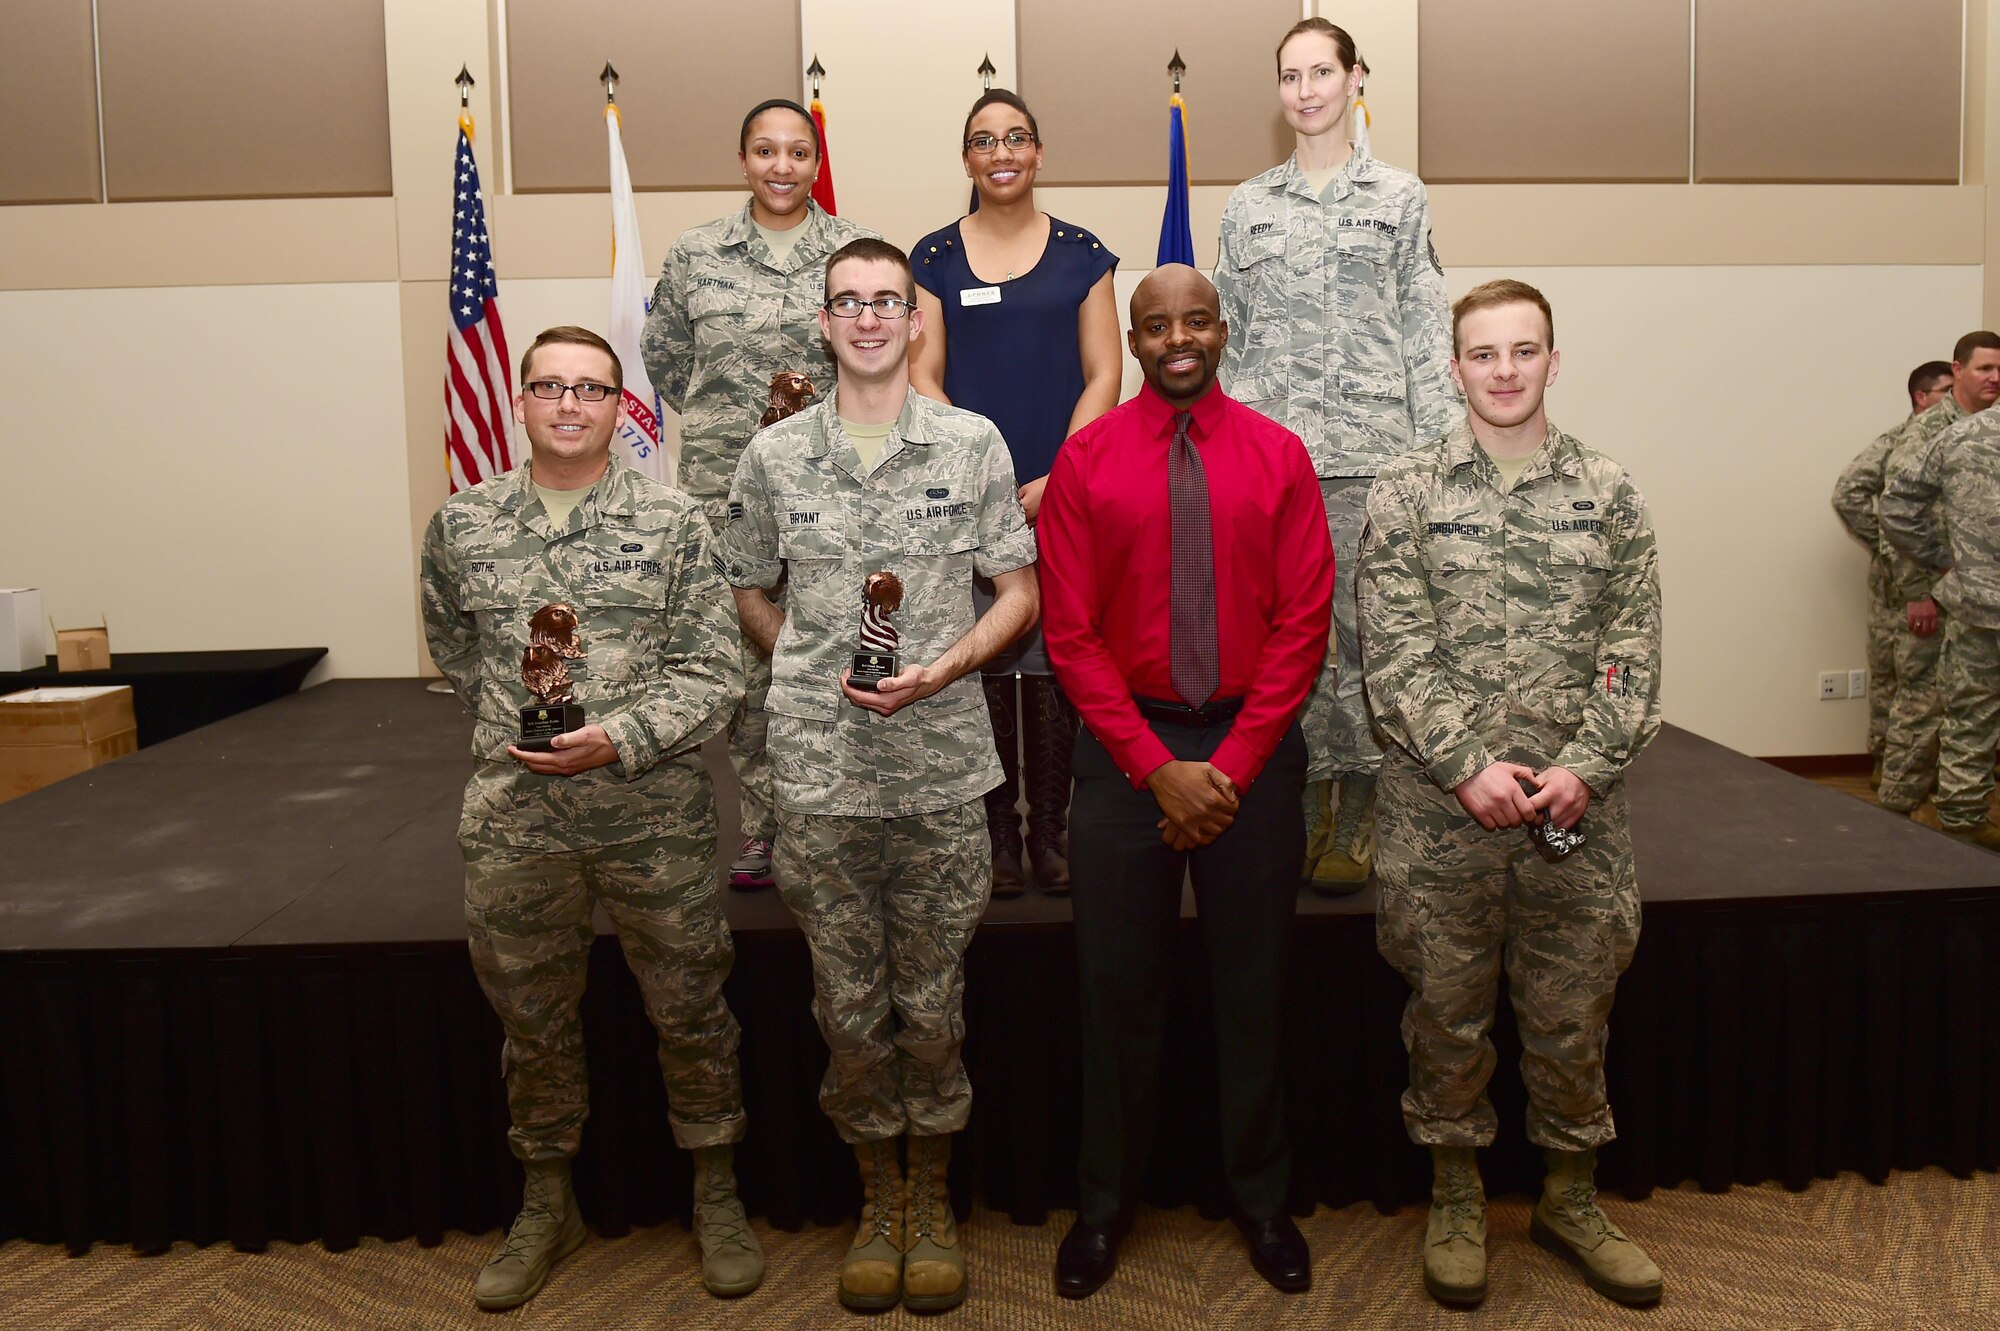 Team Buckley quarterly award winners stand together Jan. 28, 2016, at the Leadership Development Center on Buckley Air Force Base, Colo. The award winners were chosen because of their hard work and dedication in their work centers. (U.S. Air Force photo by Airman 1st Class Gabrielle Spradling/Released)